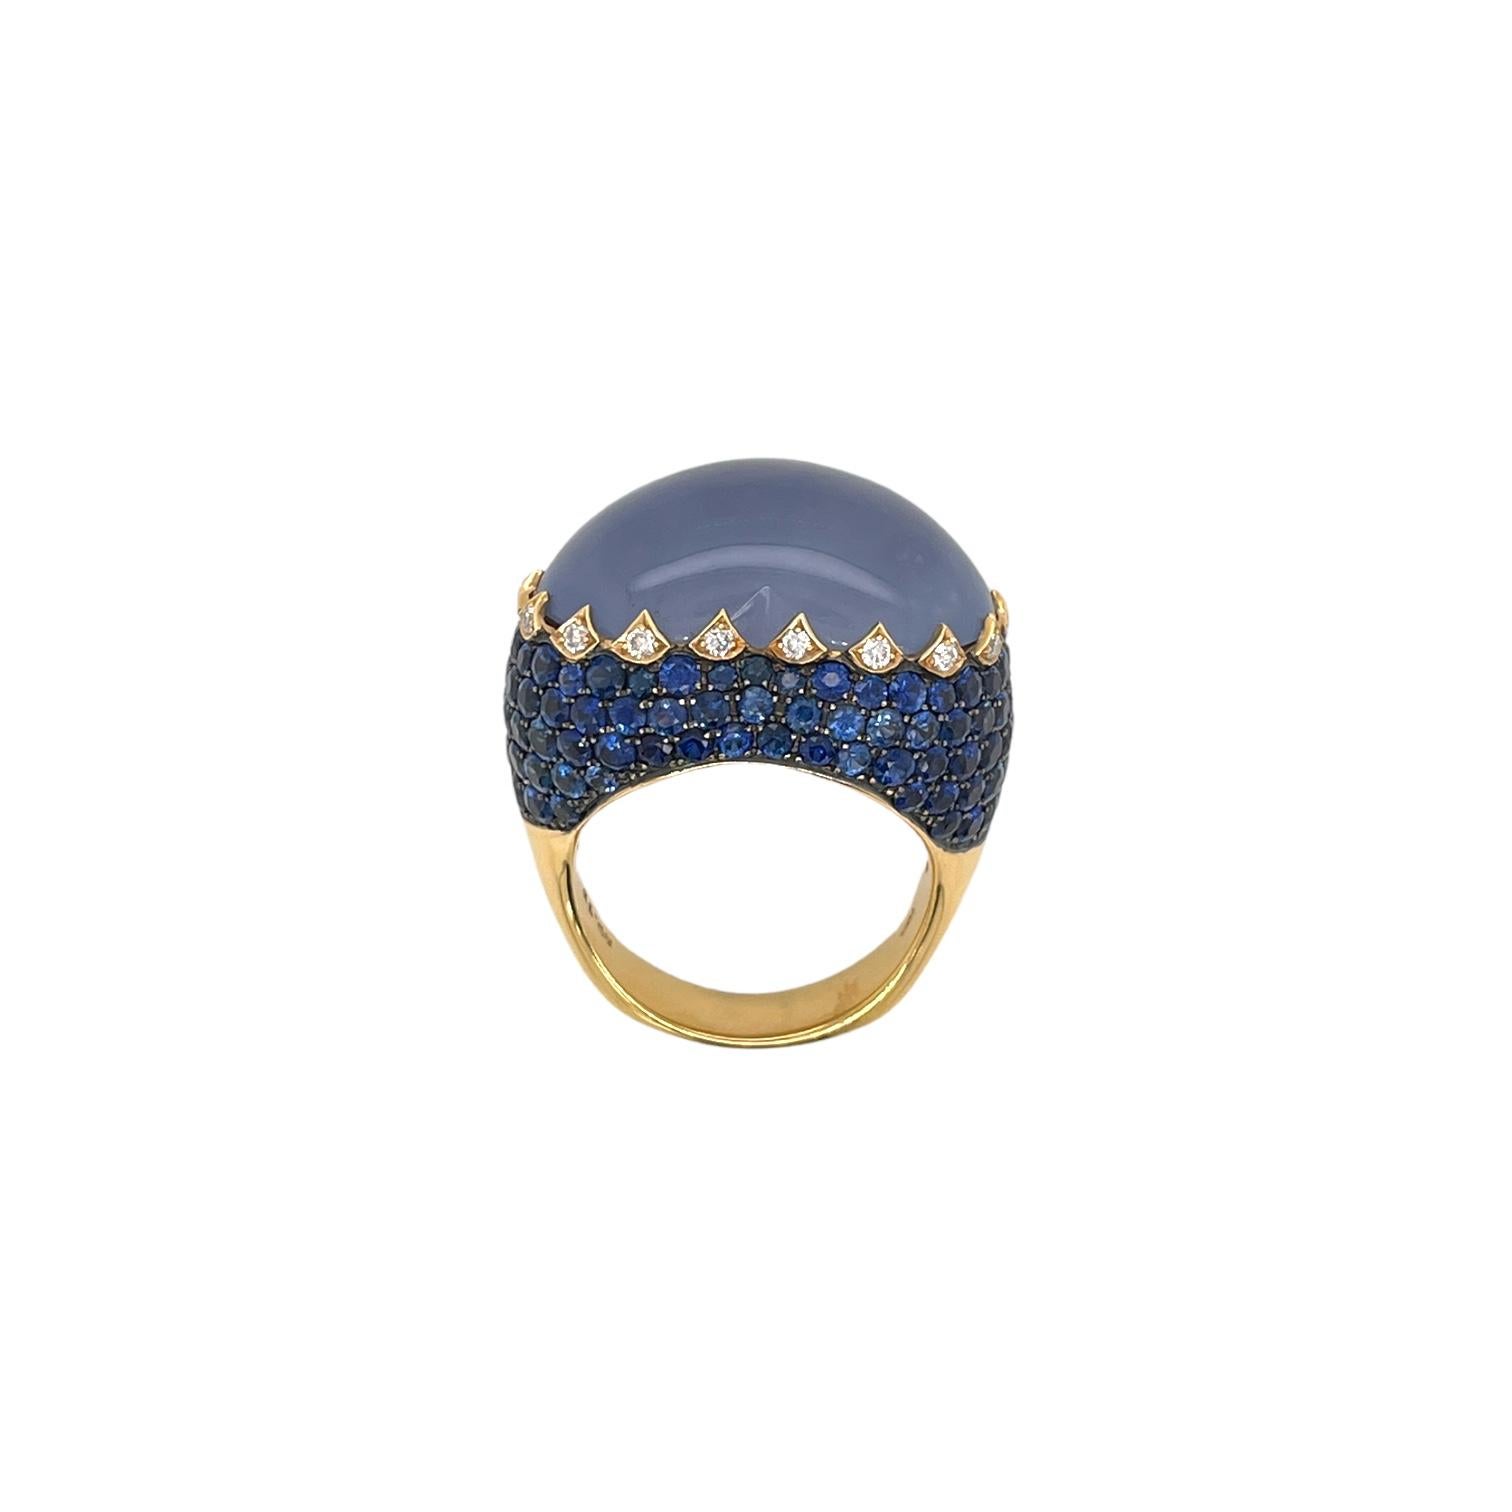 One of a kind large heart shape cabochon chalcedony gemstone, round sapphire and diamond ring in 18k yellow gold. Ring contains 1 center heart shape chalcedony 18.75ct. Center stone is accented by round sapphires, 5.53tcw and round brilliant